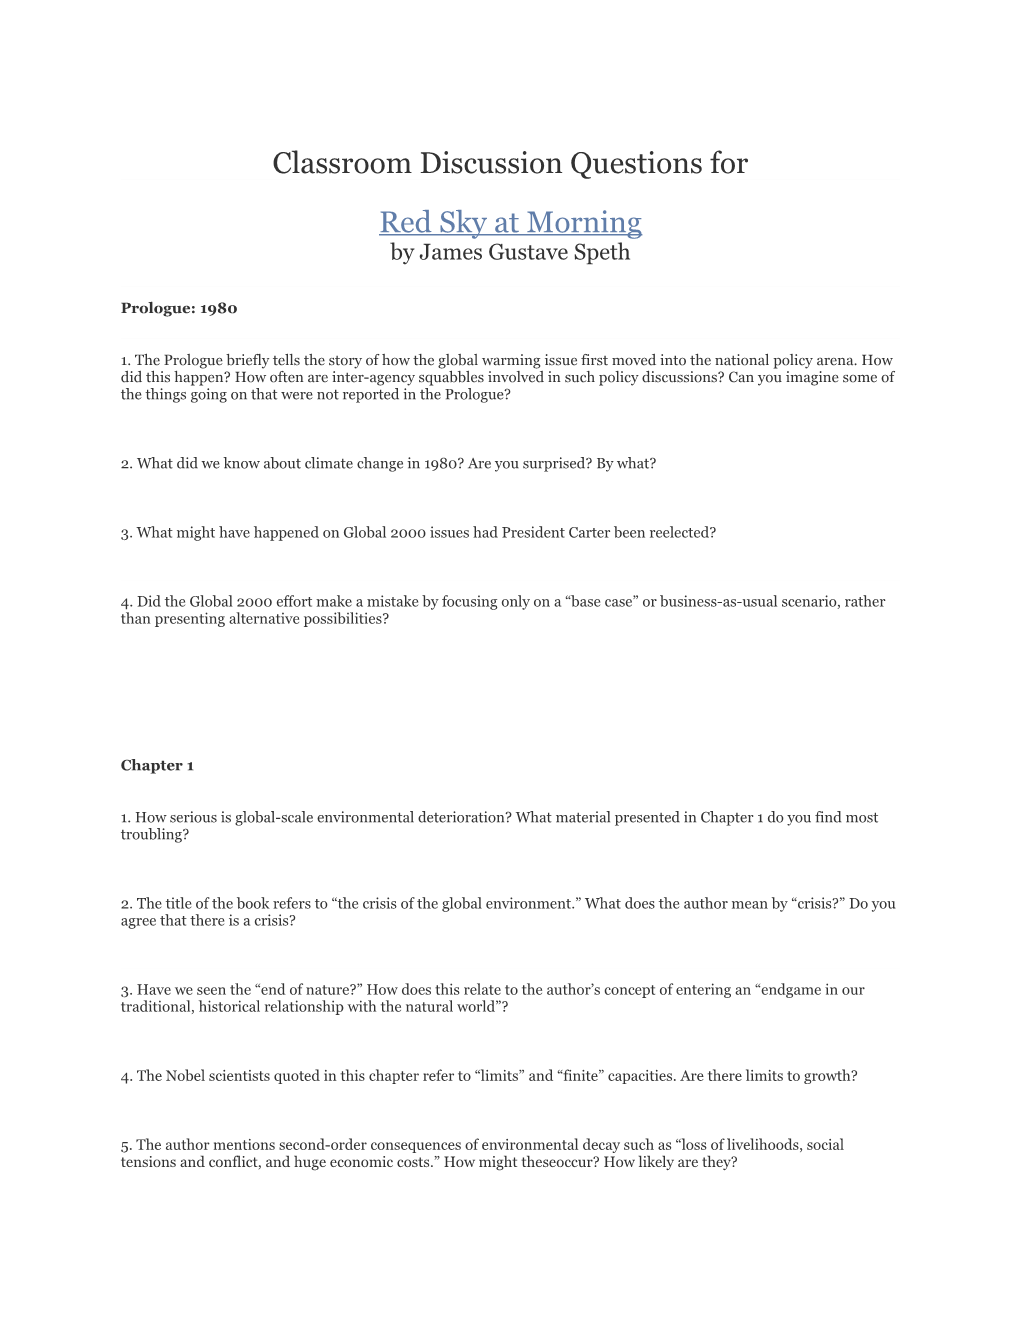 Classroom Discussion Questions For